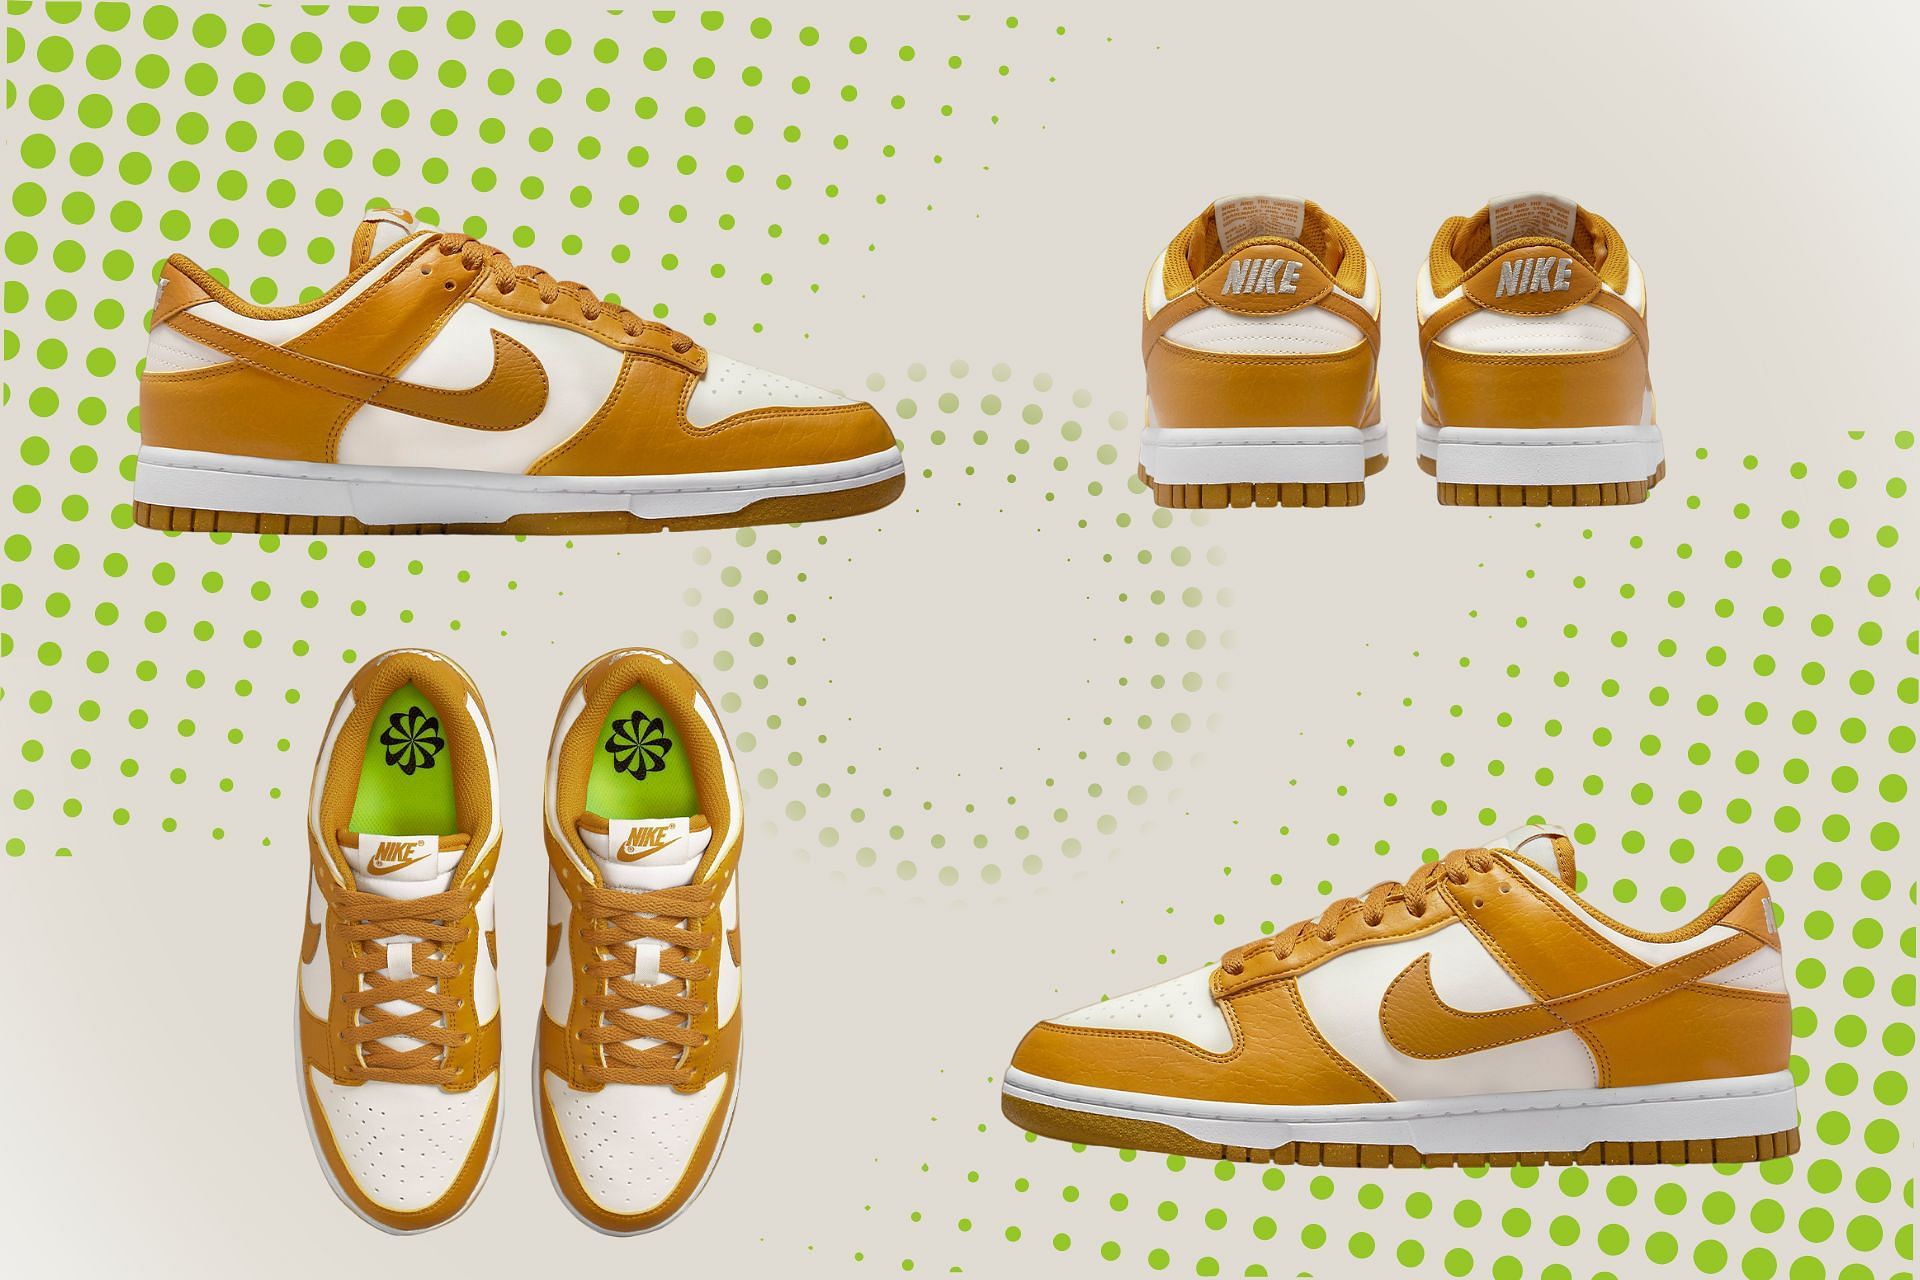 The upcoming Nike Dunk Low &quot;Phantom Gold&quot; sneakers come clad in a traditional two-toned color scheme (Image via Sportskeeda)